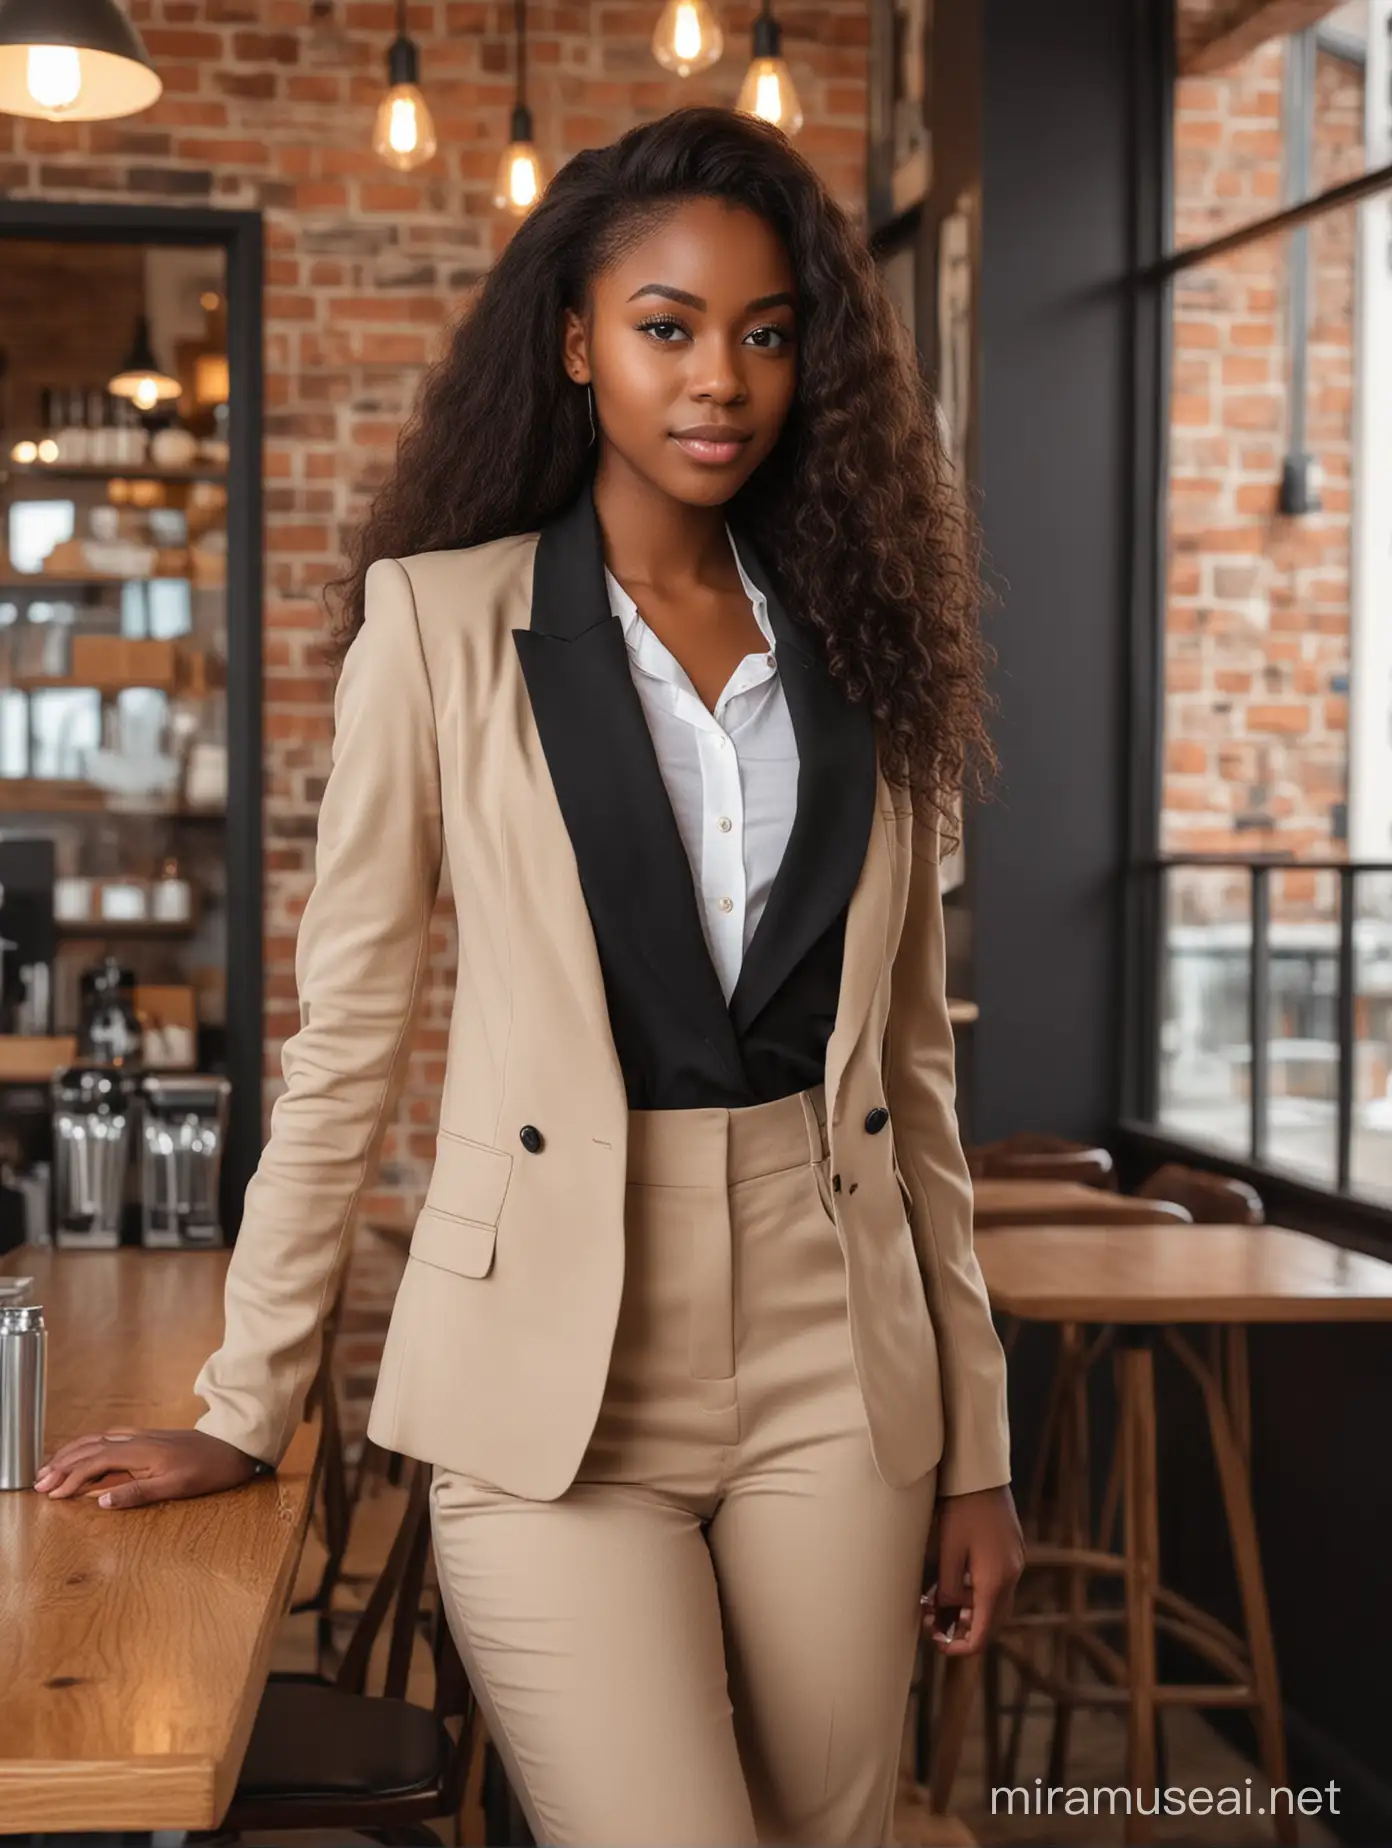 beautiful black girl, 24 years old, long hair, stylish blazer suit, standing in coffee shop
